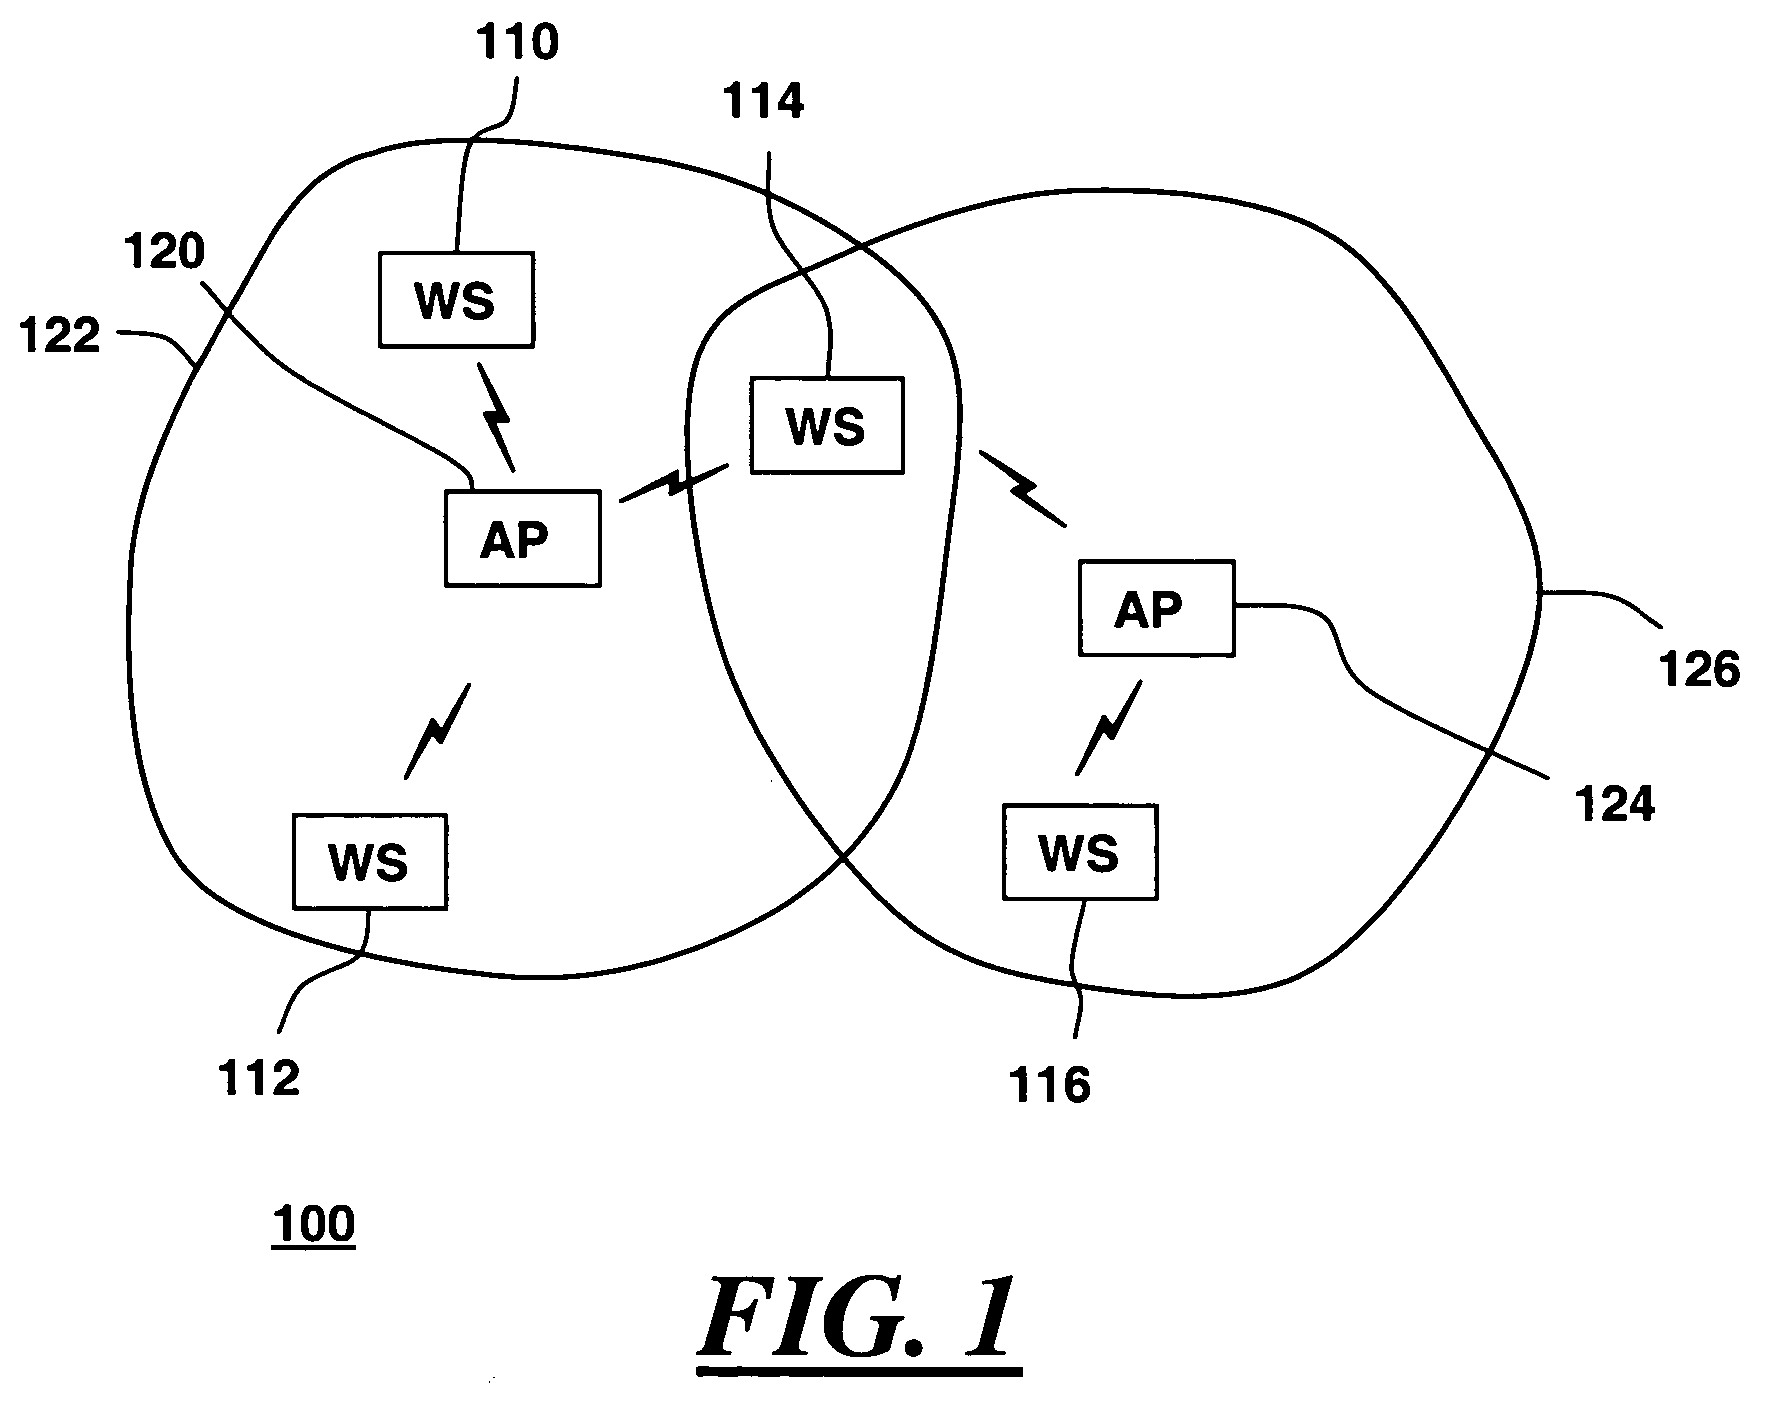 Method of scanning for beacon transmissions in a WLAN